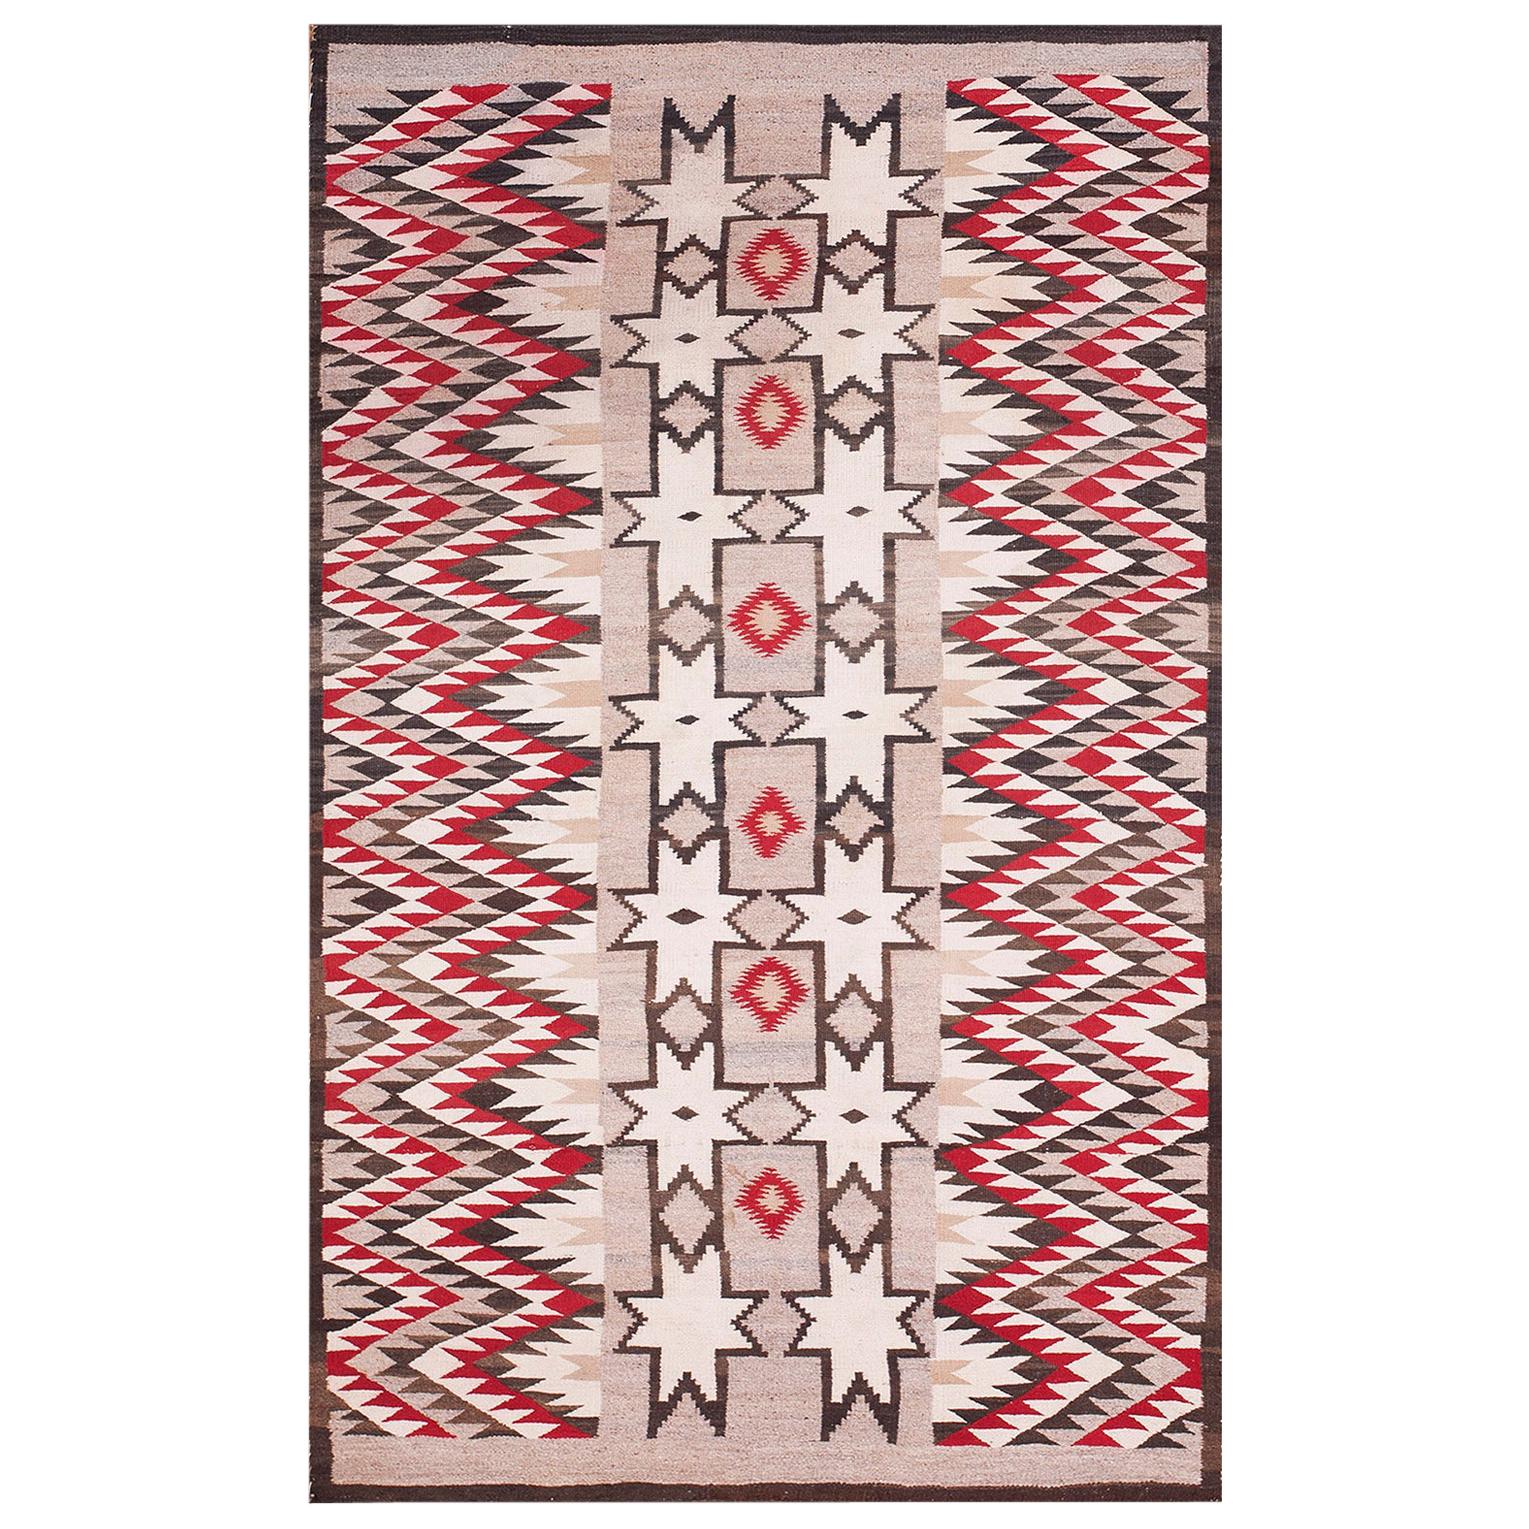 Early 20th Century American Navajo Carpet ( 3'8" x 5'10" - 112 x 178 ) For Sale